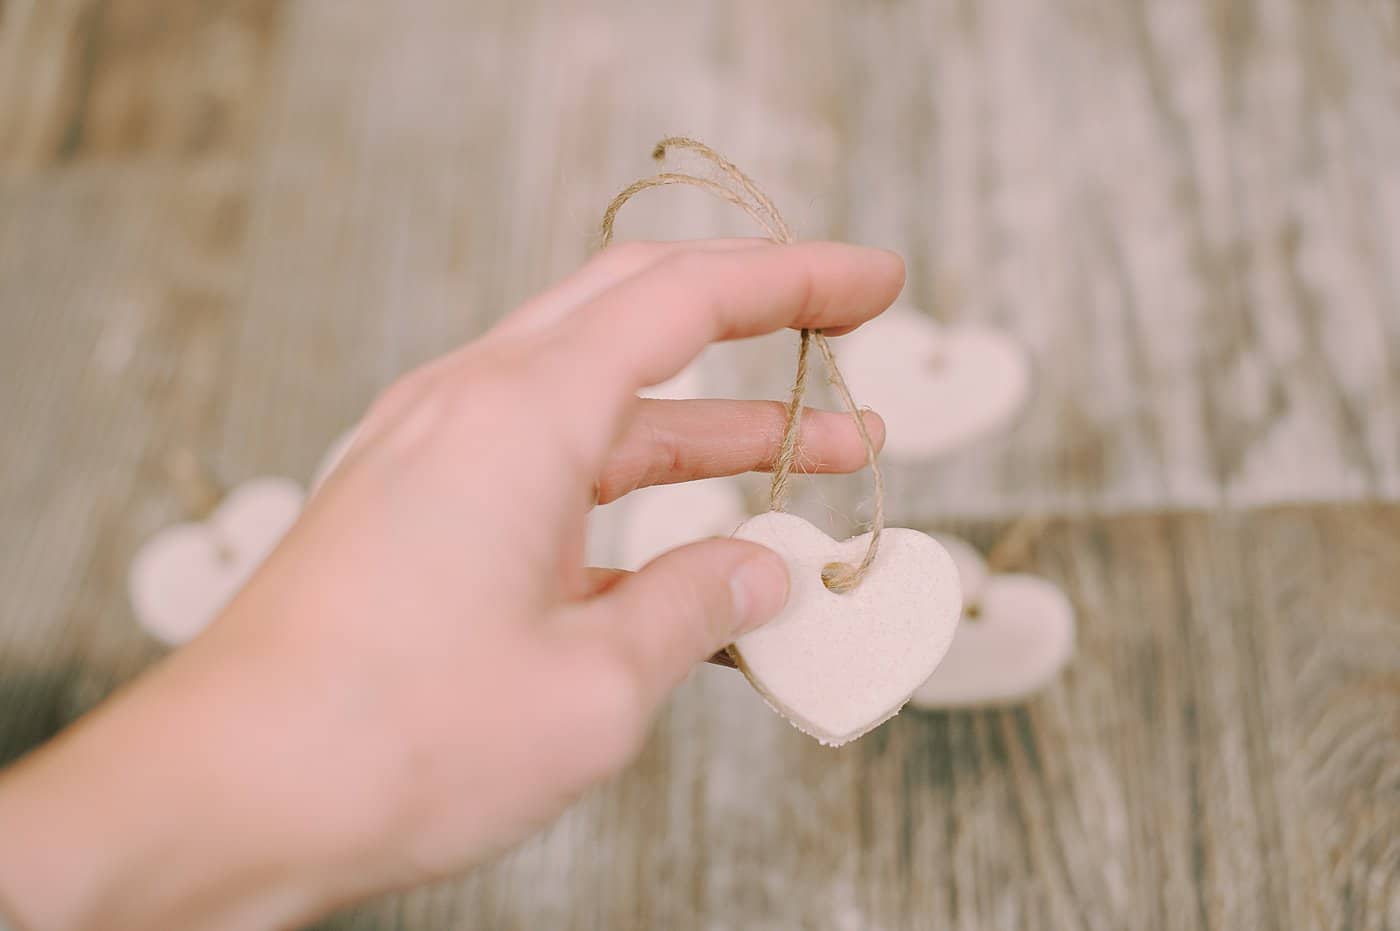 Tie small twine strings to the salt dough ornaments so you can add them to a longer twine string to hang as a garland.